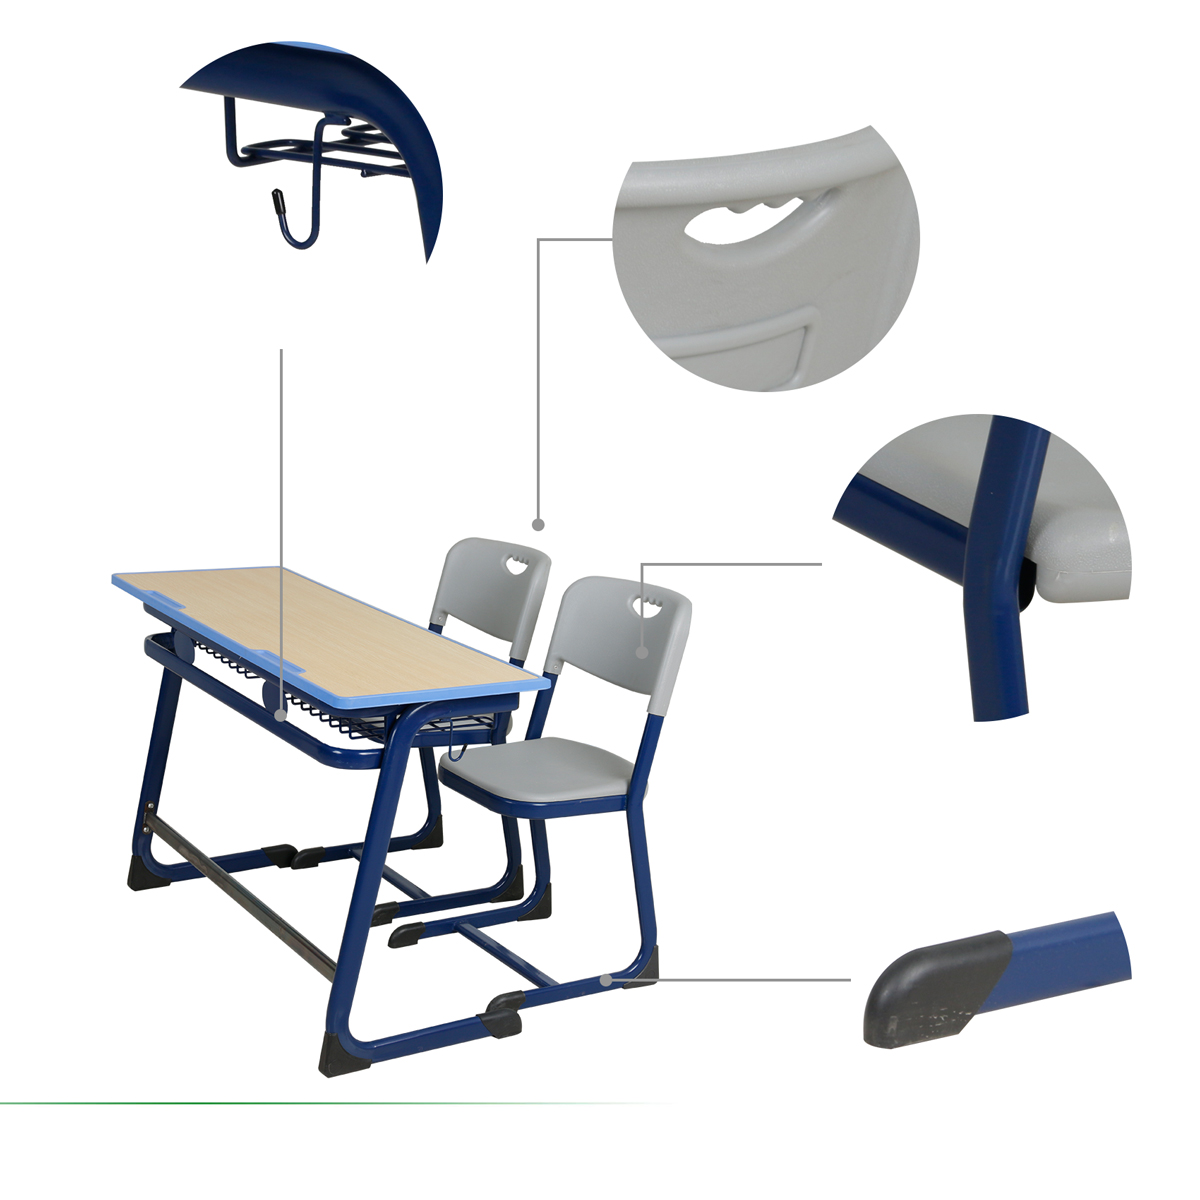 Double Seater Desk and Chair 2.jpg